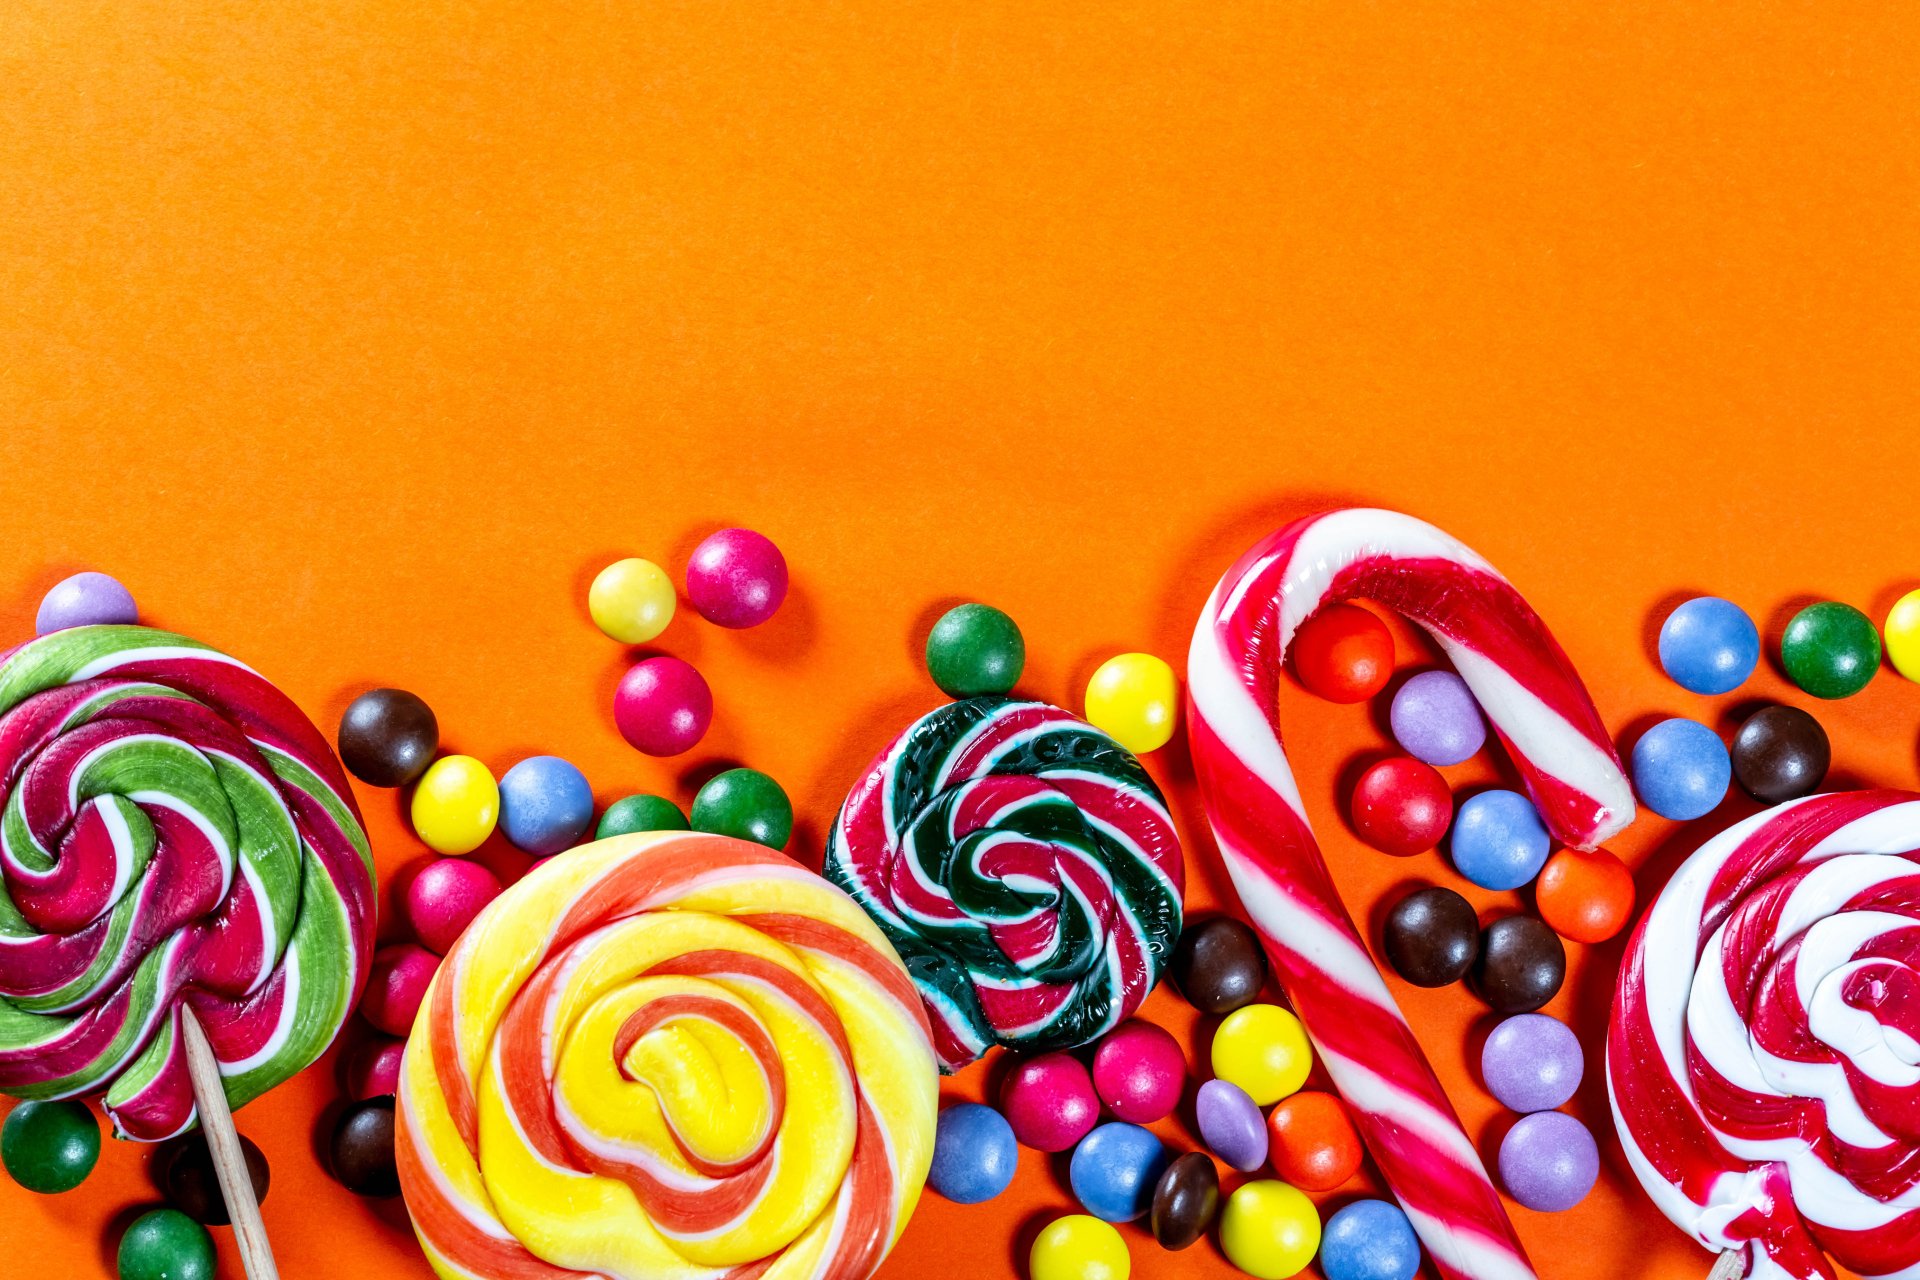 4050x2700 Candy Wallpaper Background Image. 